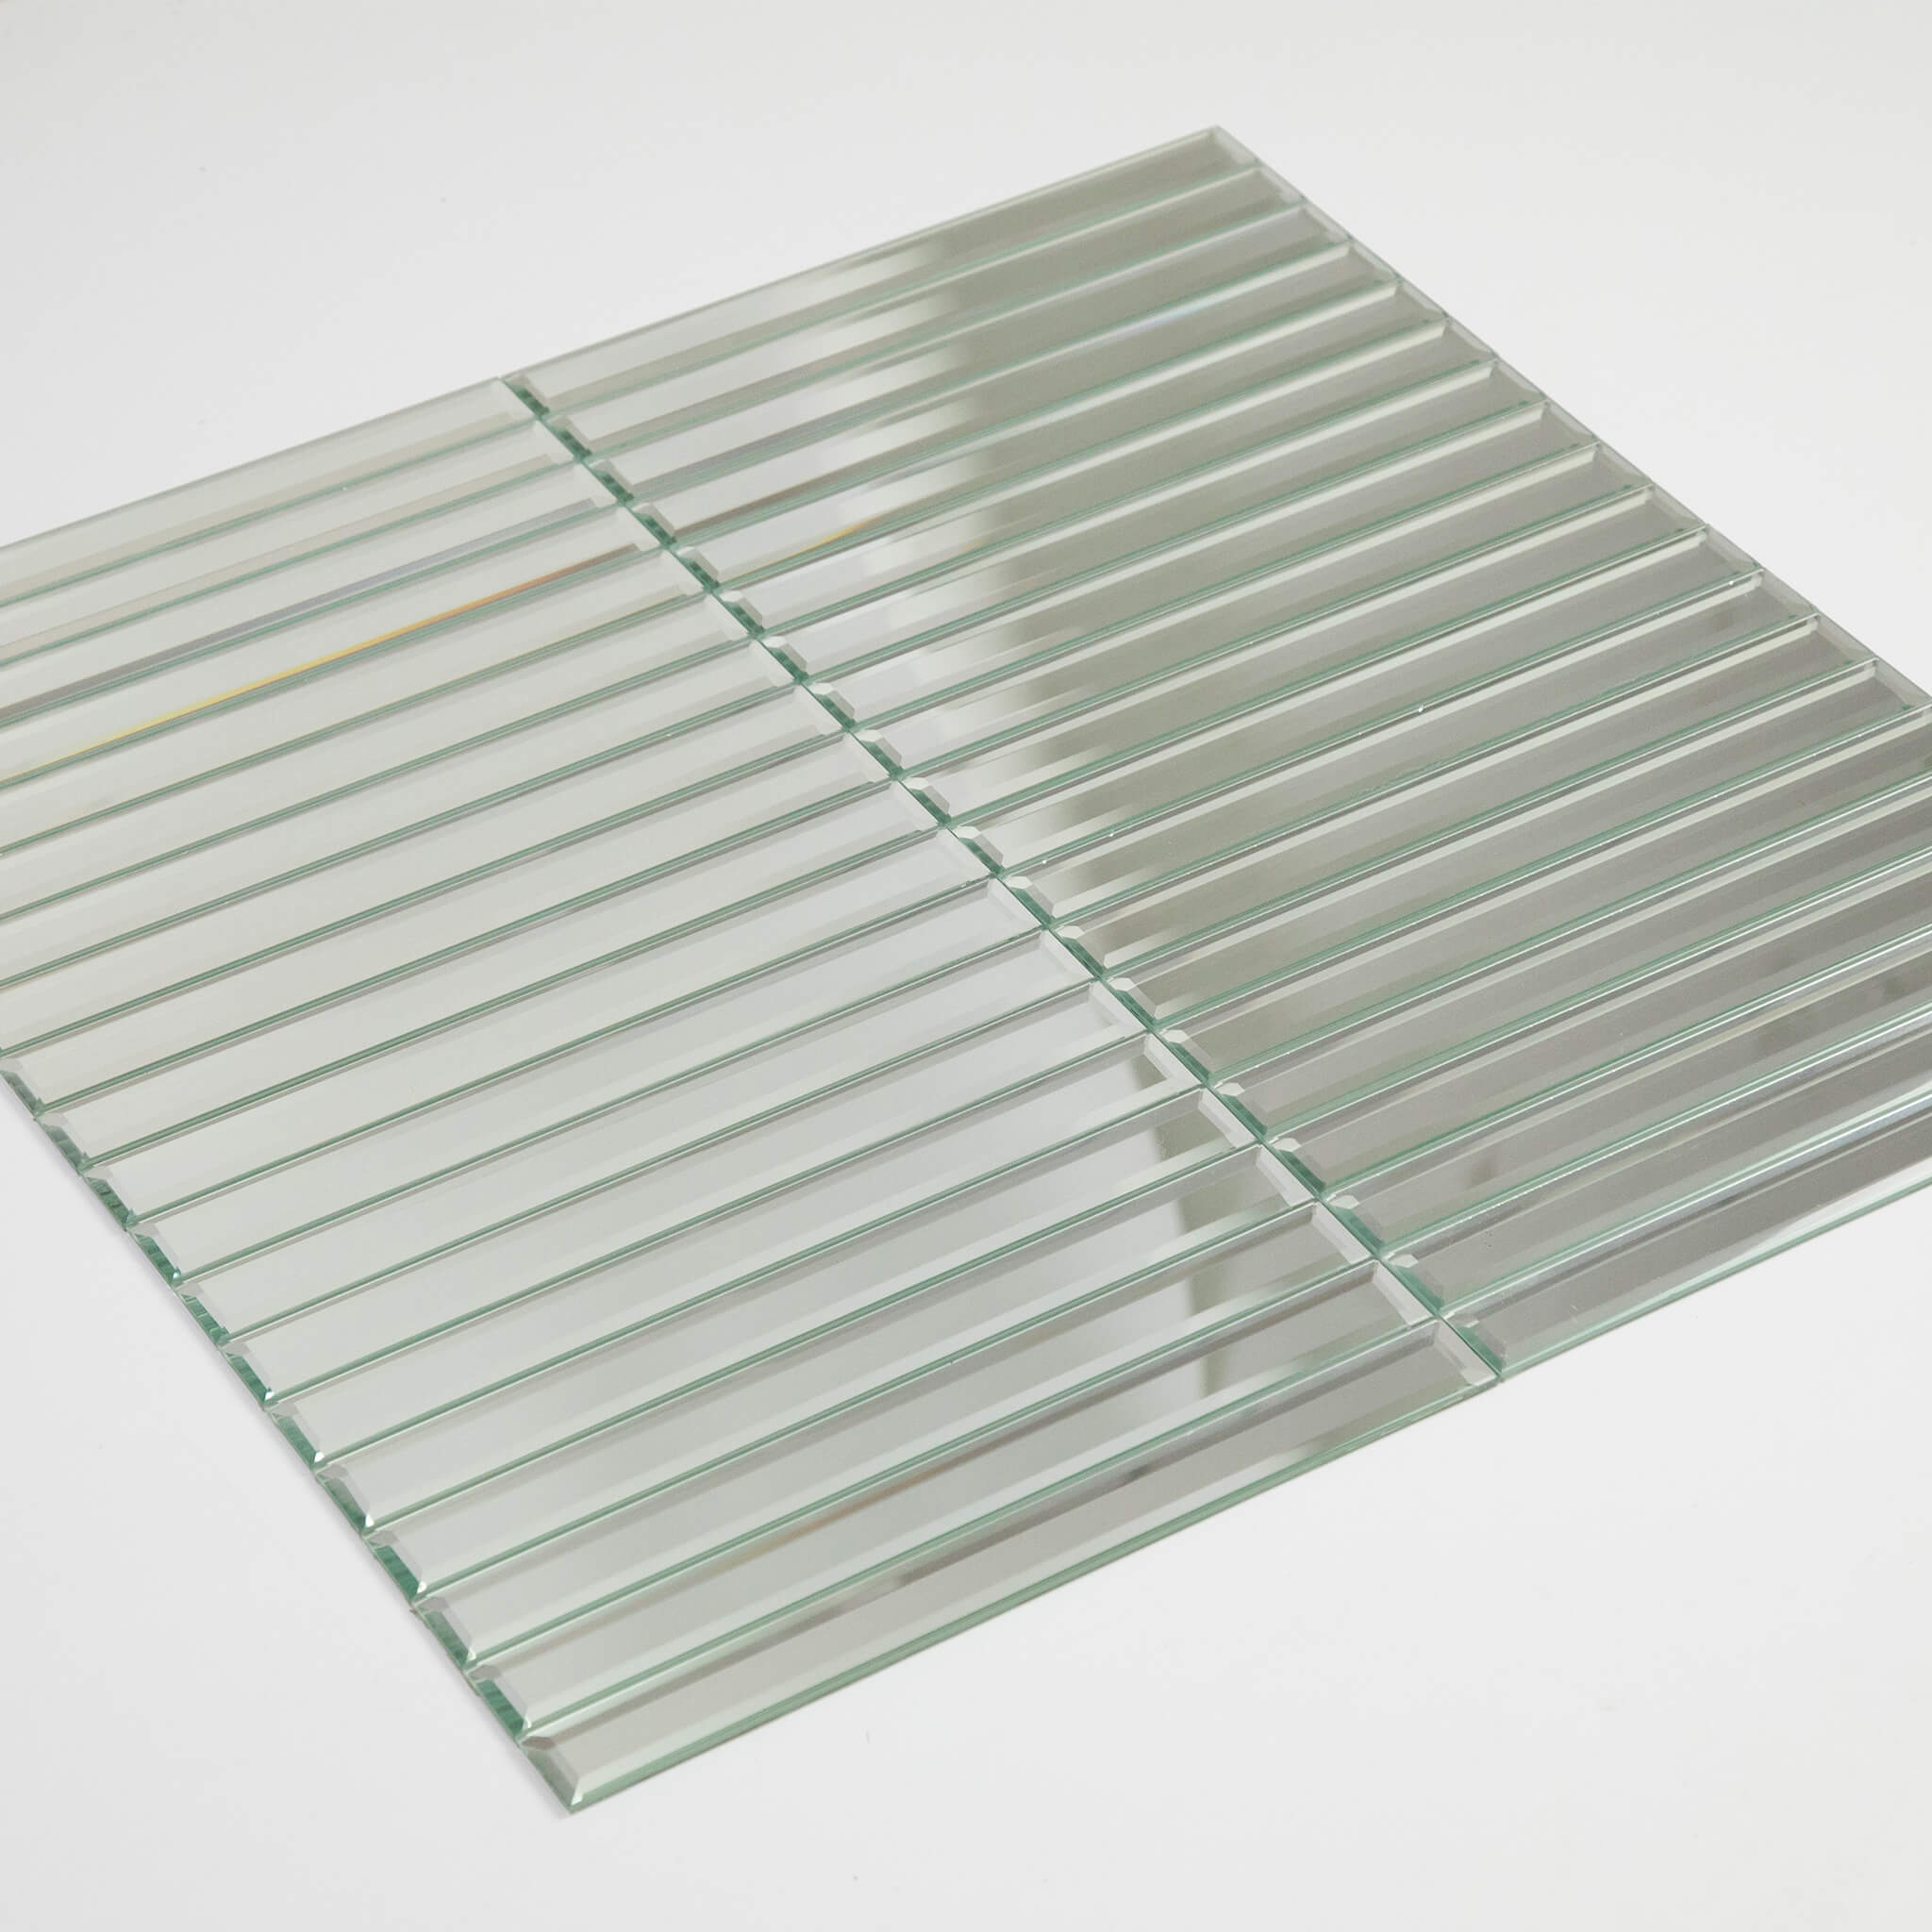 Beveled Silver Mirror Glass Subway Tile 12x12 Inch Long Strip Mesh Backing Pack of 5 sq.ft